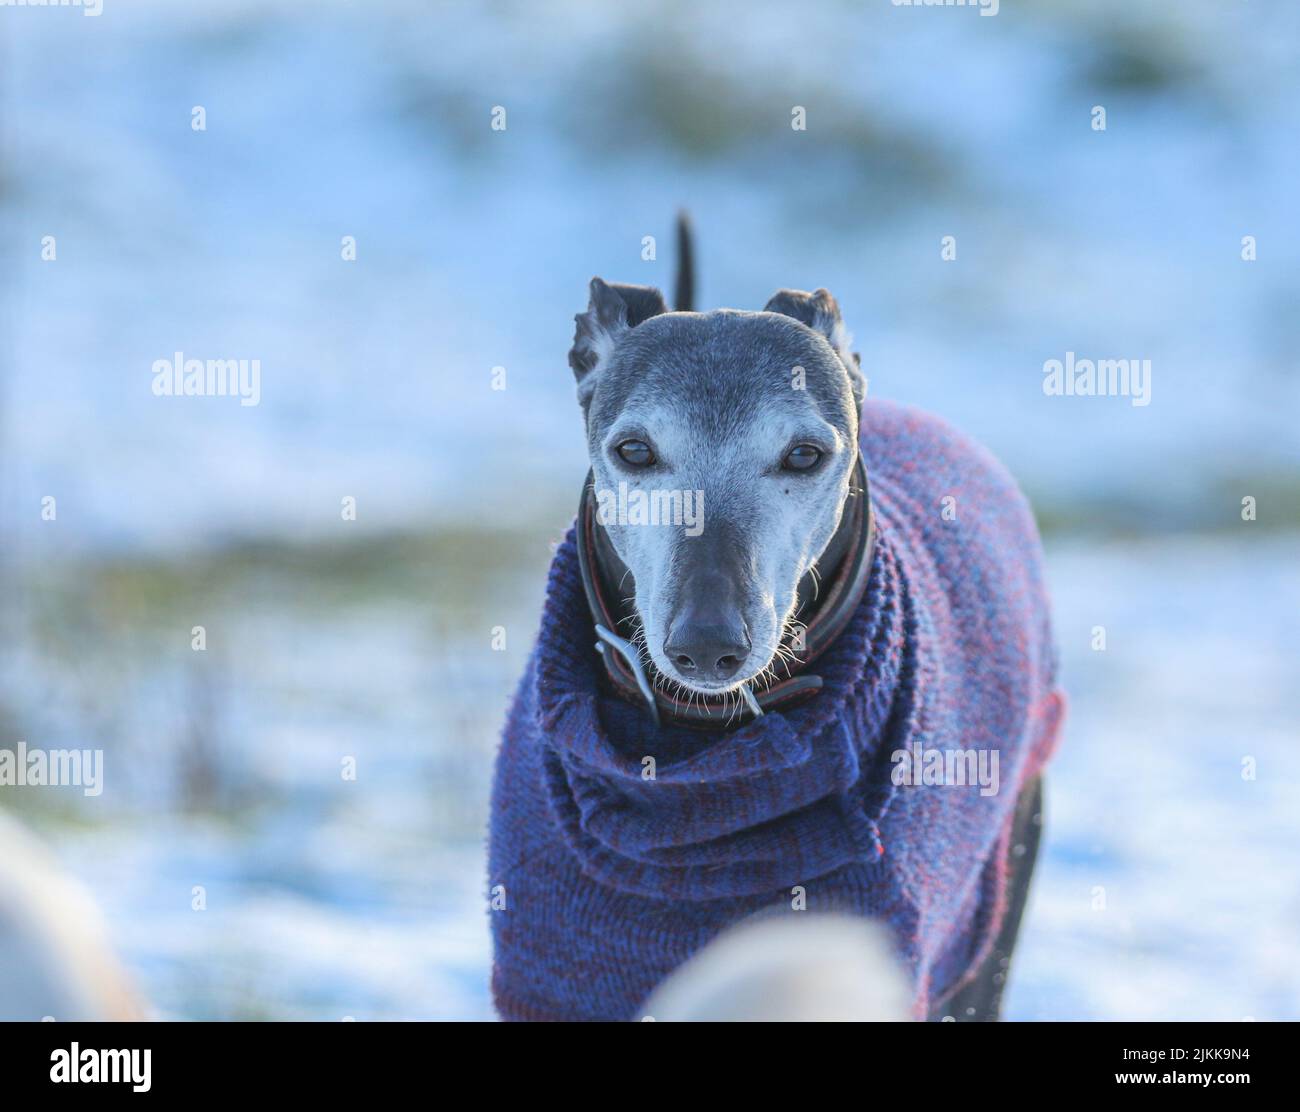 A shallow focus shot of a Greyhound dog wearing blue sweater and sitting outdoors on a sunny day with blurred background Stock Photo